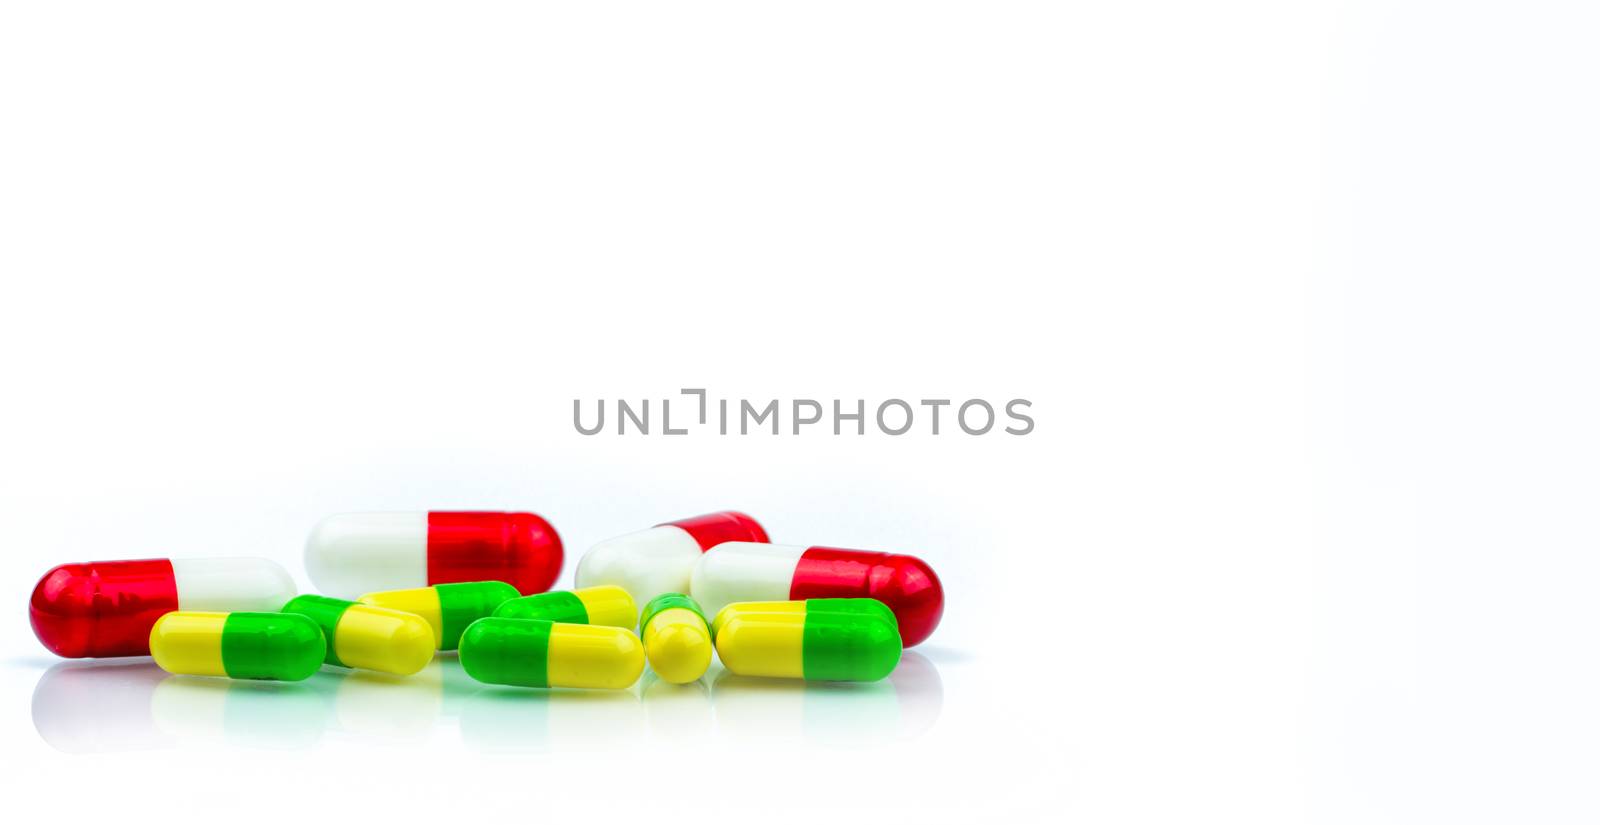 Colorful of capsule pills on white background with copy space for text. Pharmacology and drug interactions concept. Pharmaceutical industry. Pharmacy background. Global healthcare concept.